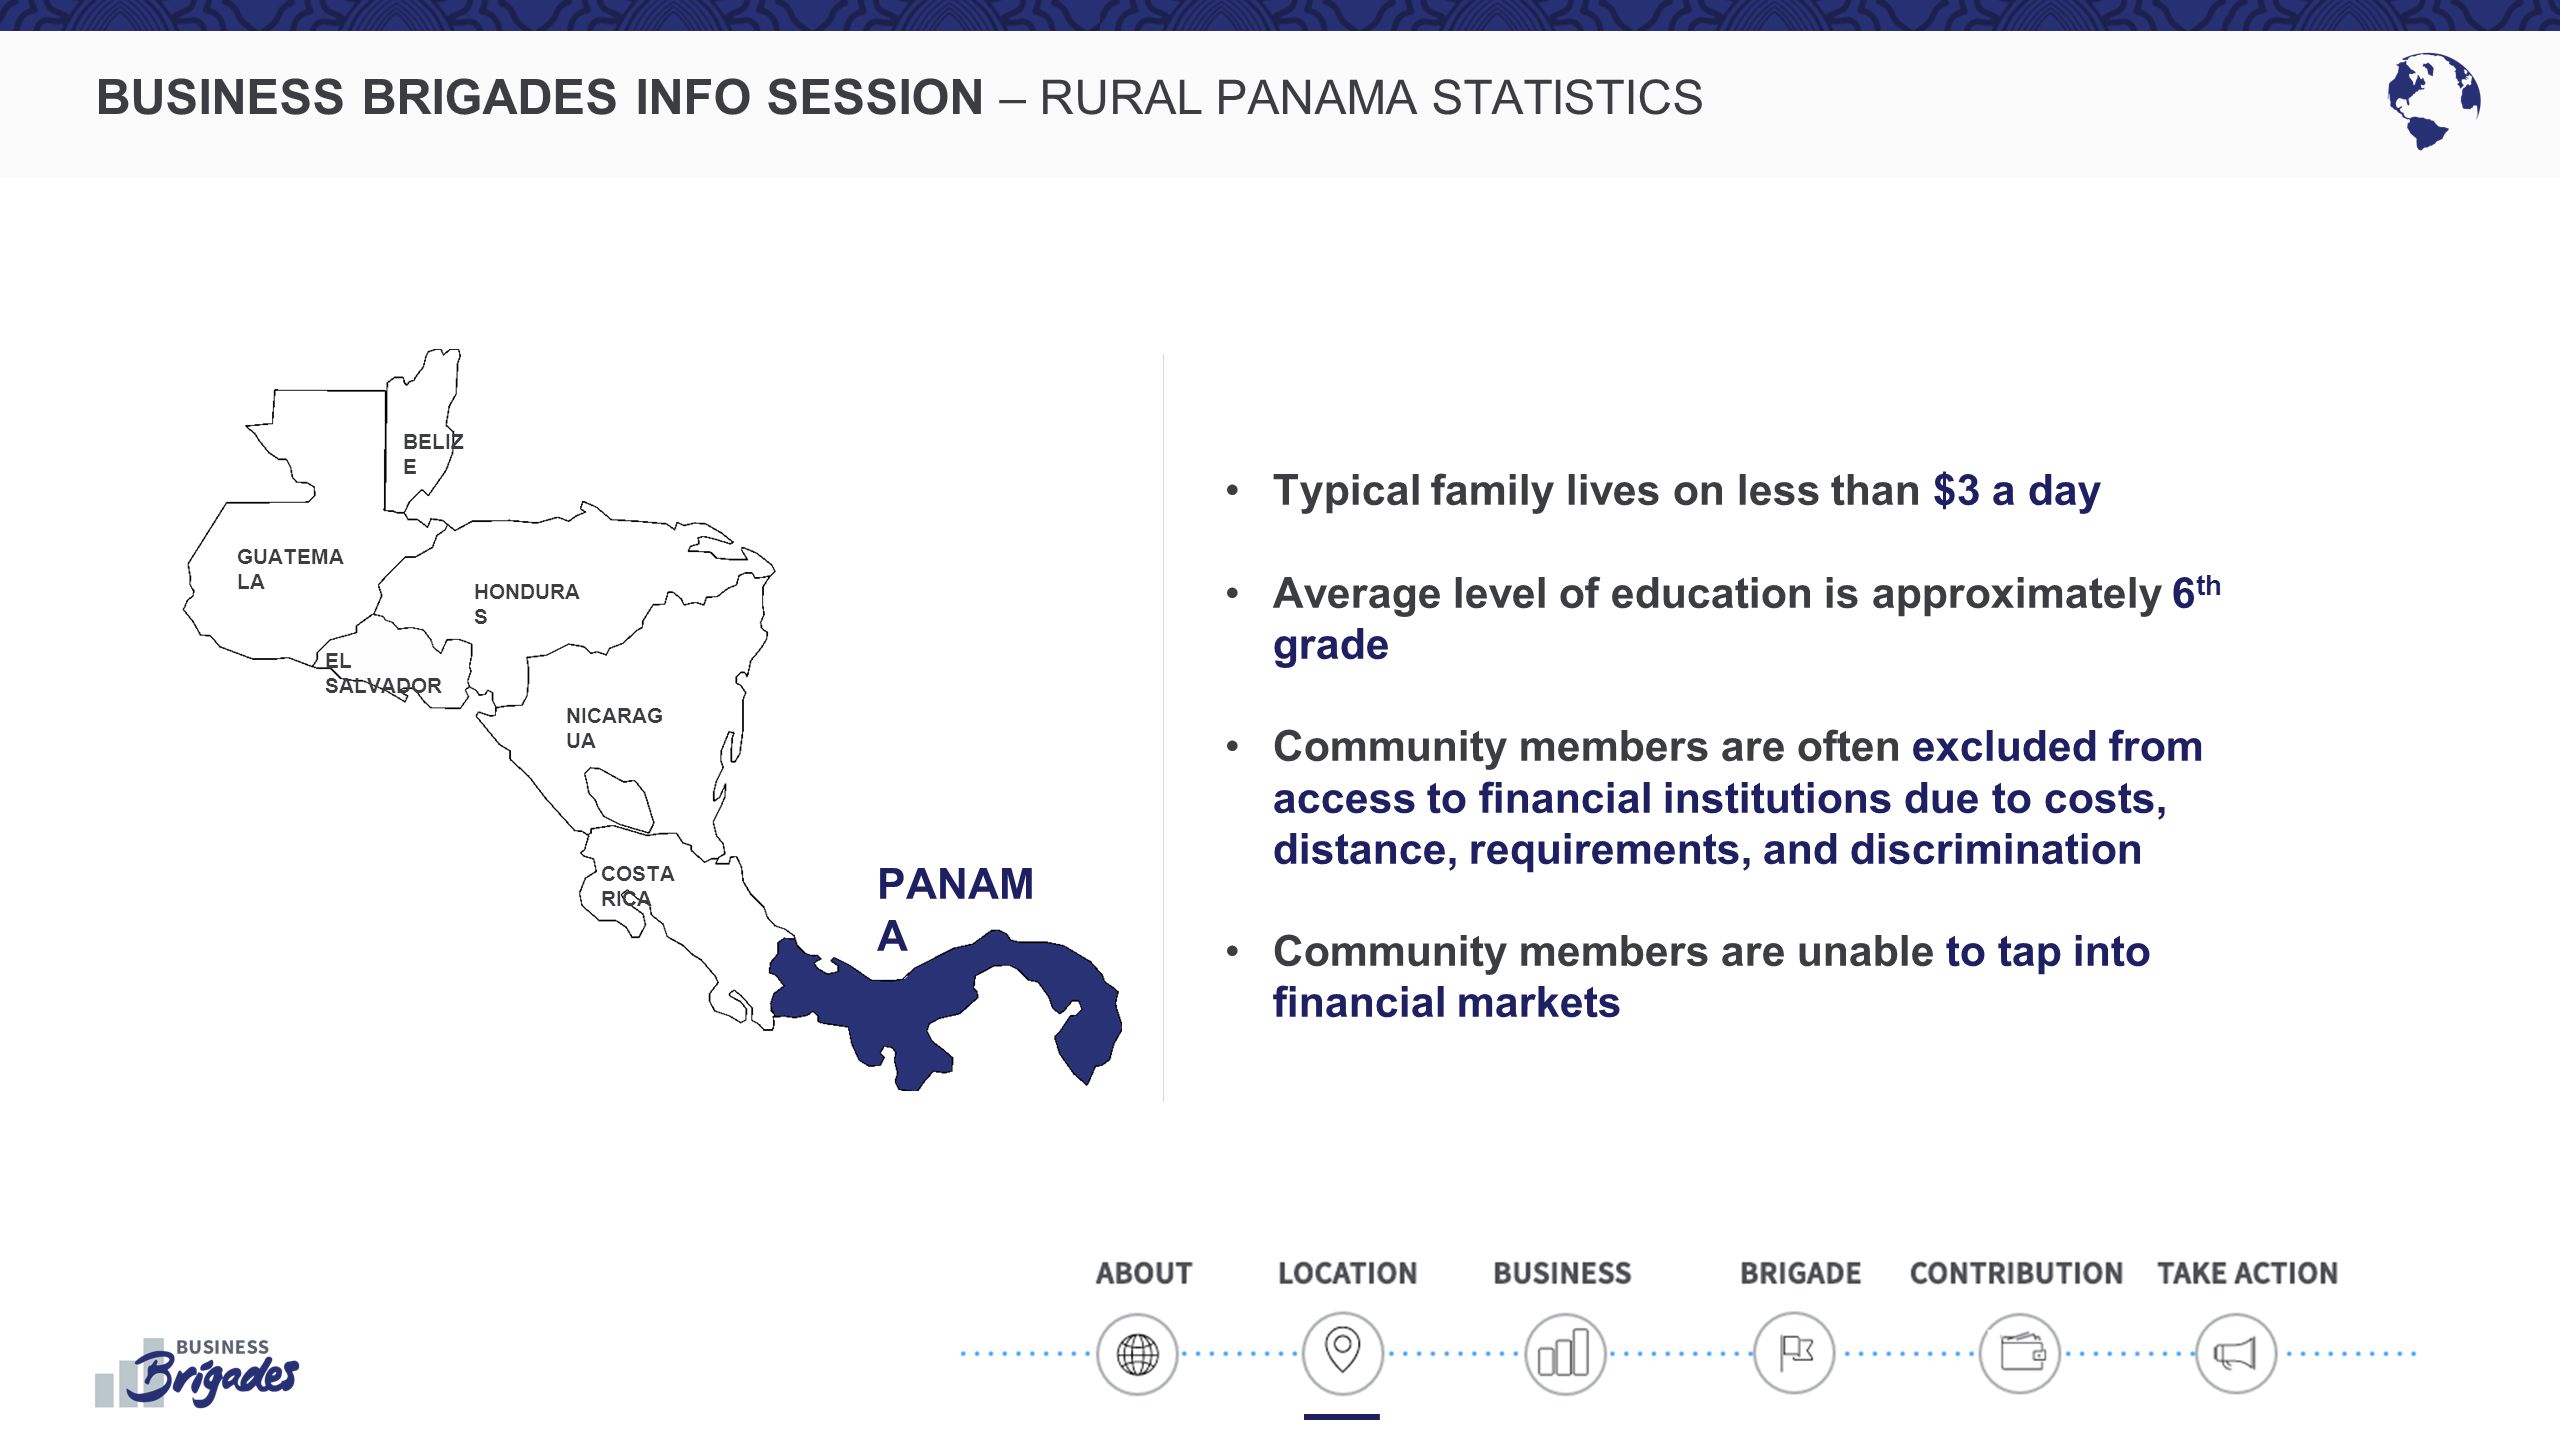 BUSINESS BRIGADES INFO SESSION – RURAL PANAMA STATISTICS Typical family lives on less than $3 a day Average level of education is approximately 6 th grade Community members are often excluded from access to financial institutions due to costs, distance, requirements, and discrimination Community members are unable to tap into financial markets PANAM A NICARAG UA COSTA RICA GUATEMA LA BELIZ E EL SALVADOR HONDURA S